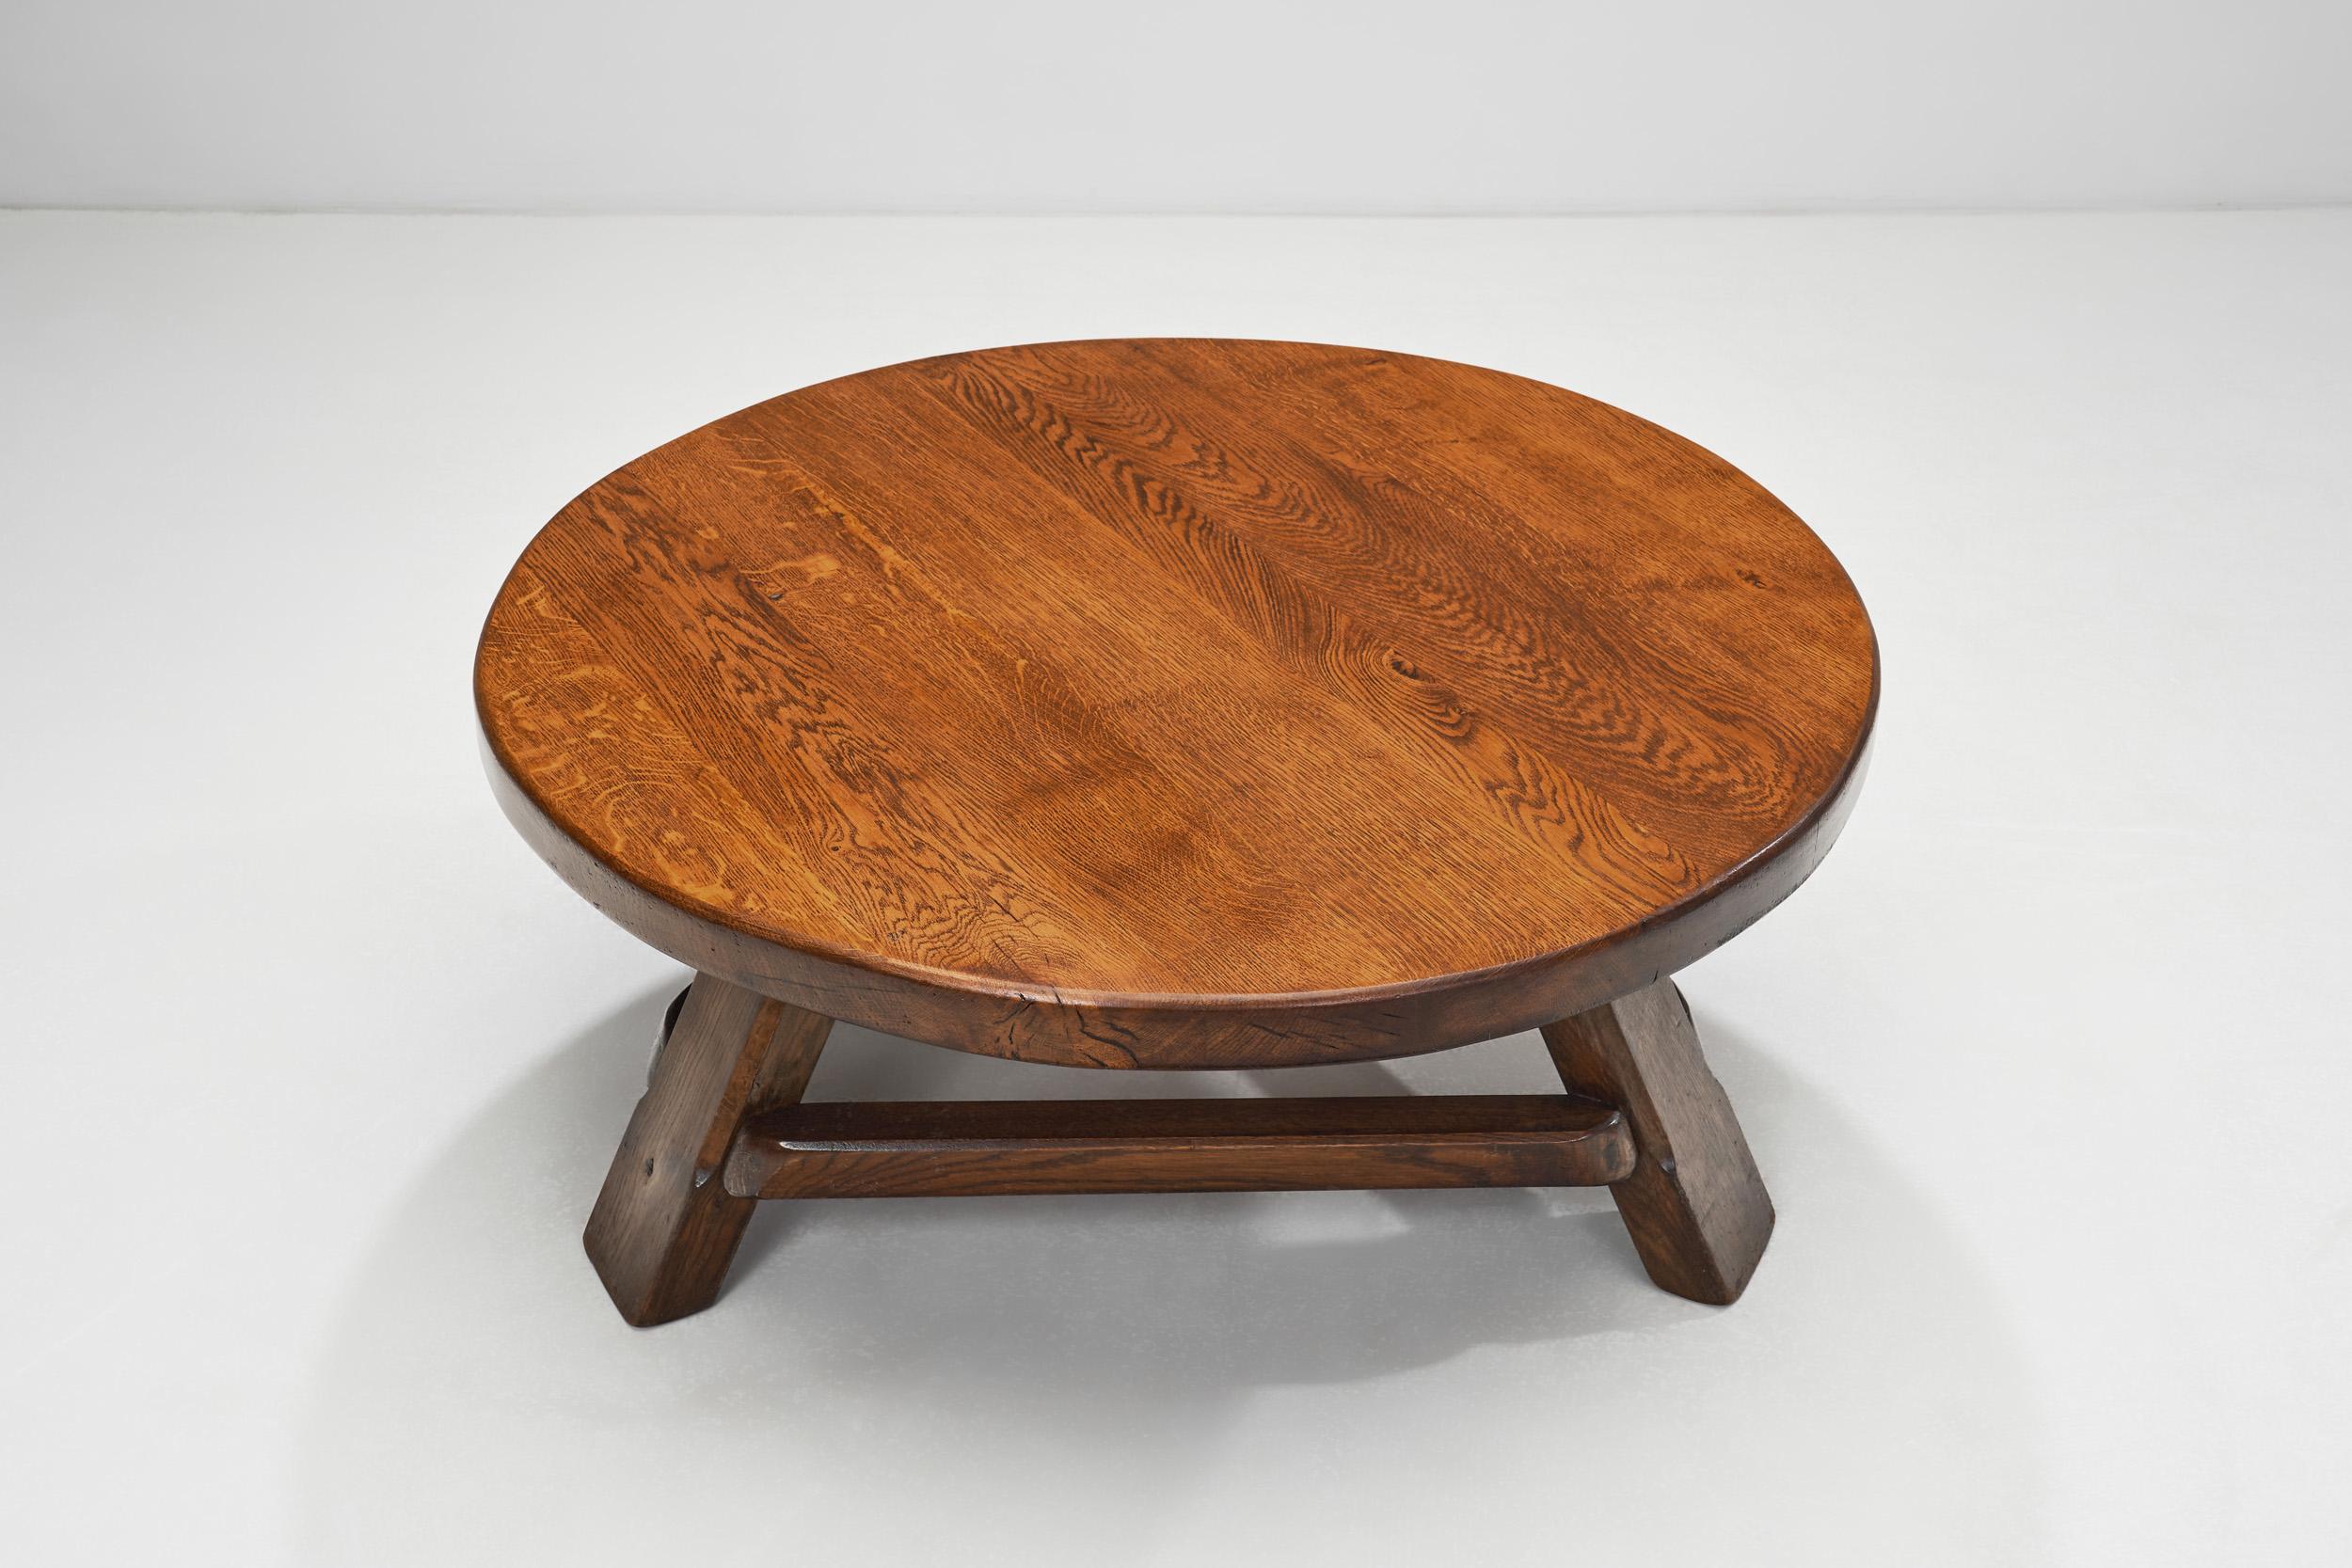 Brutalist Solid Oak Coffee Table, Europe ca 1960s For Sale 1